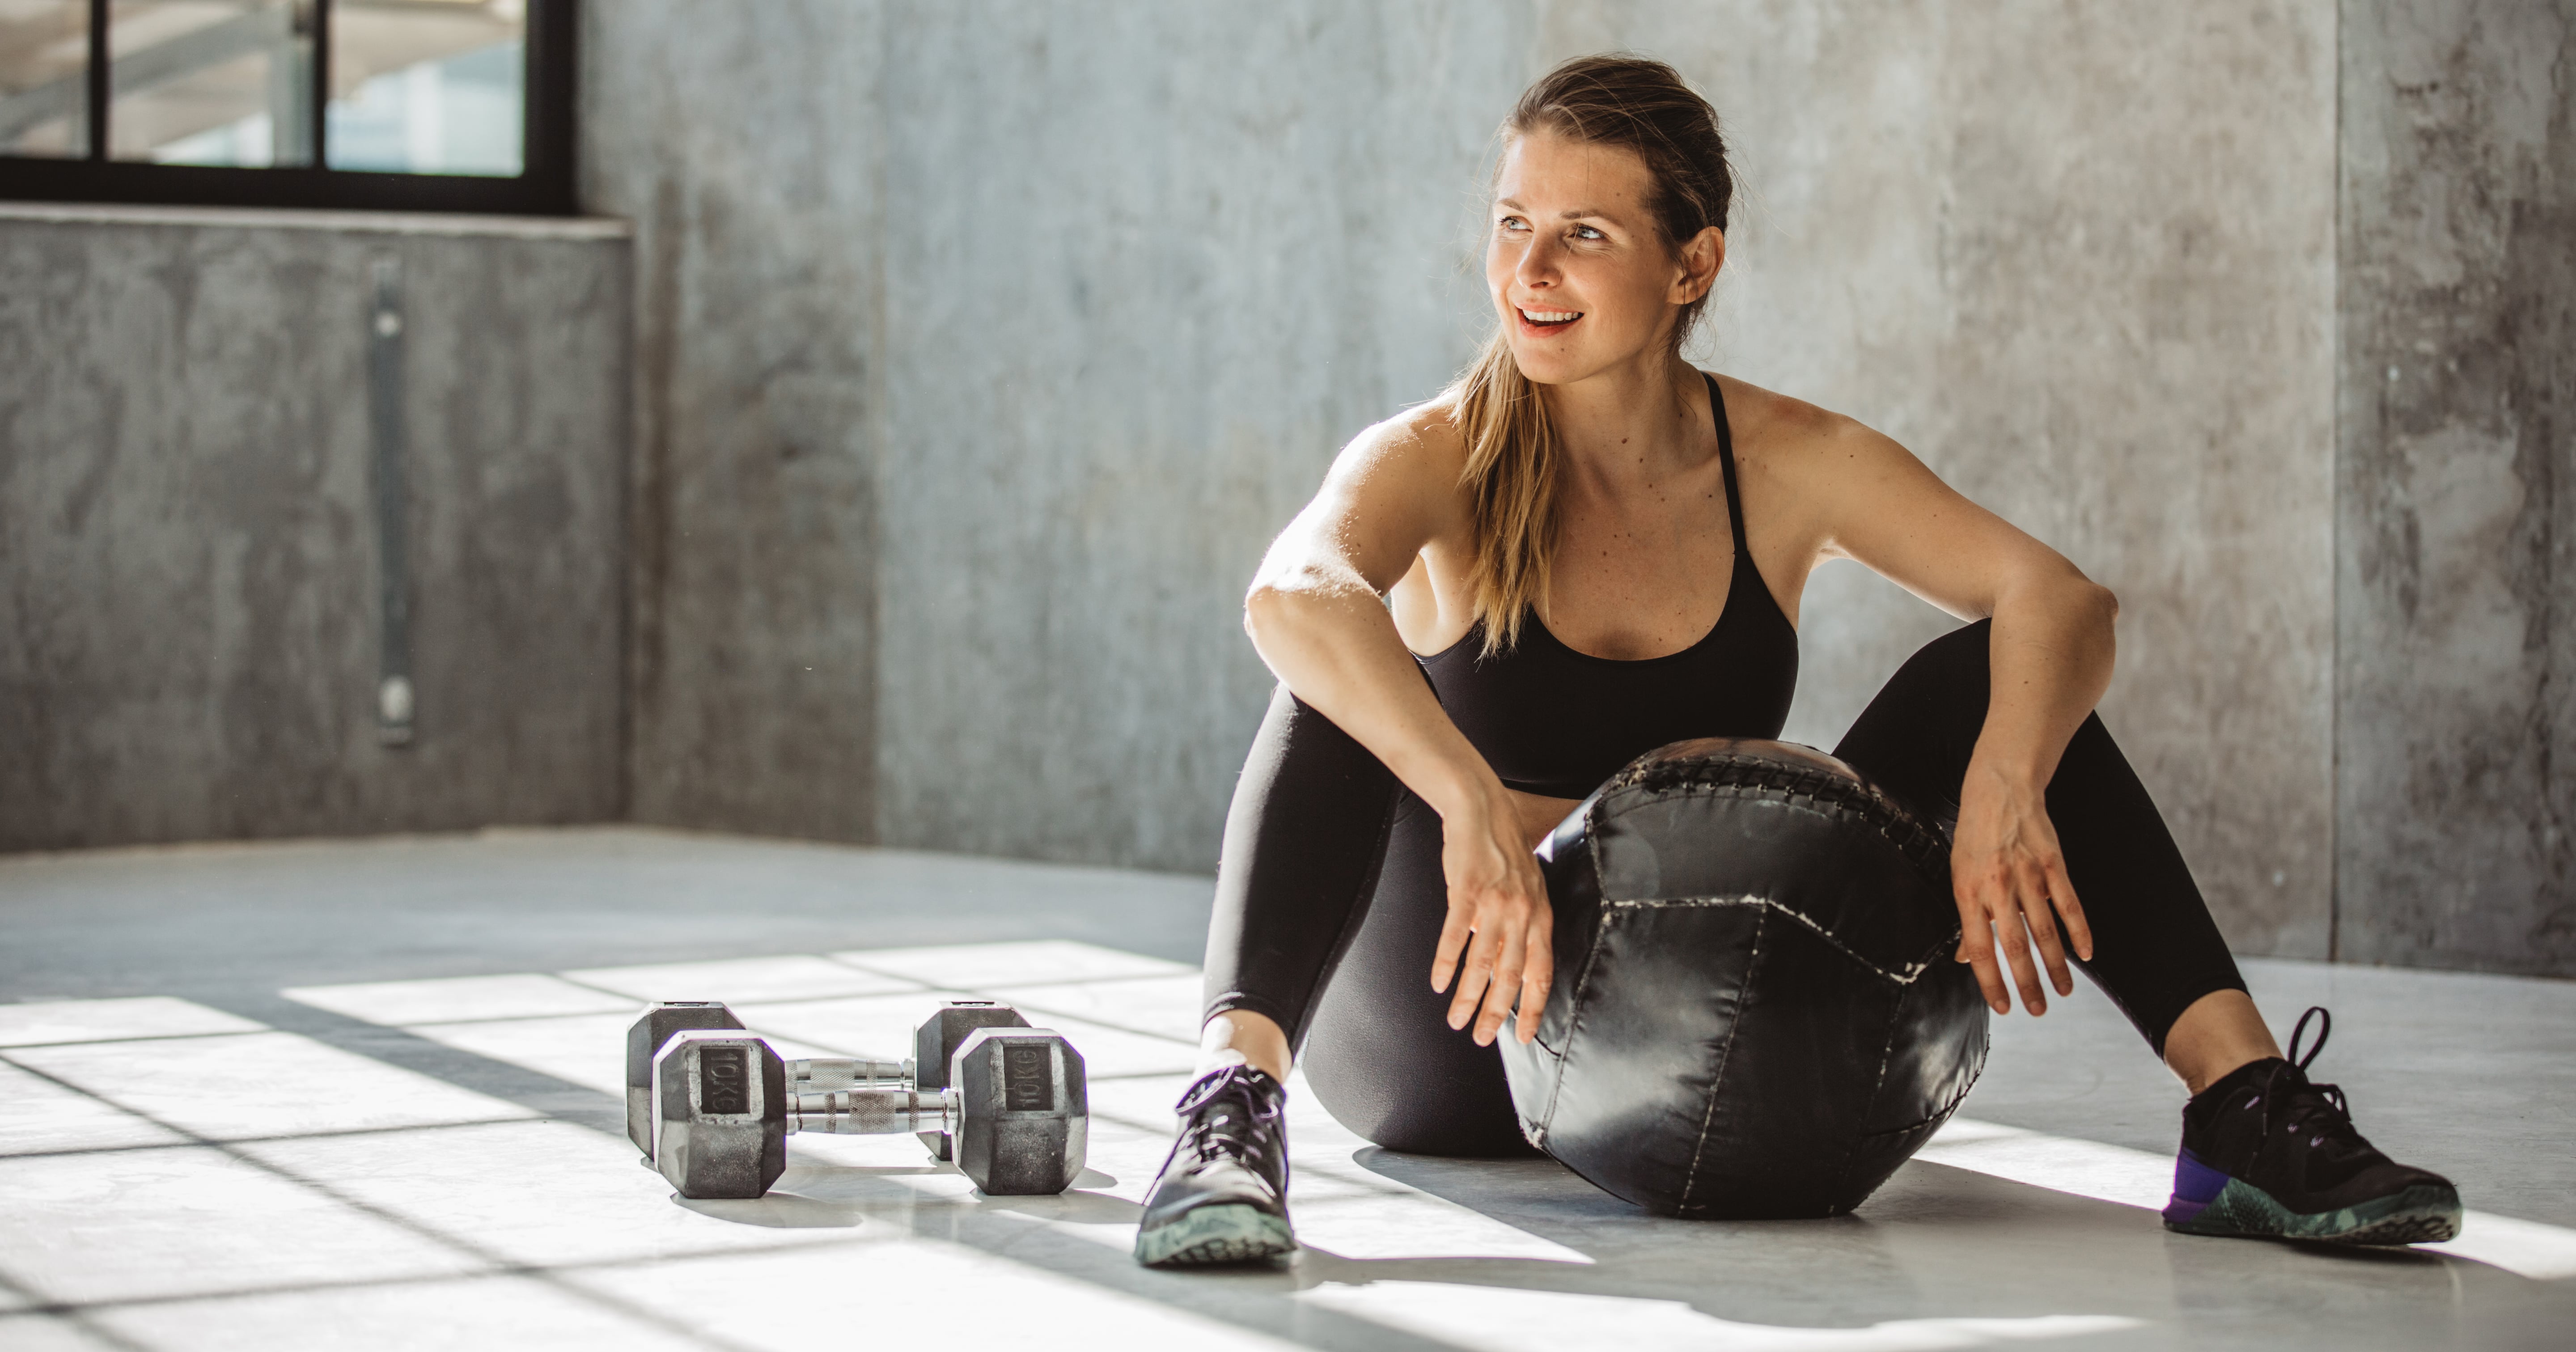 Transform your Rider Fitness Home Workouts with these Fitness Tools